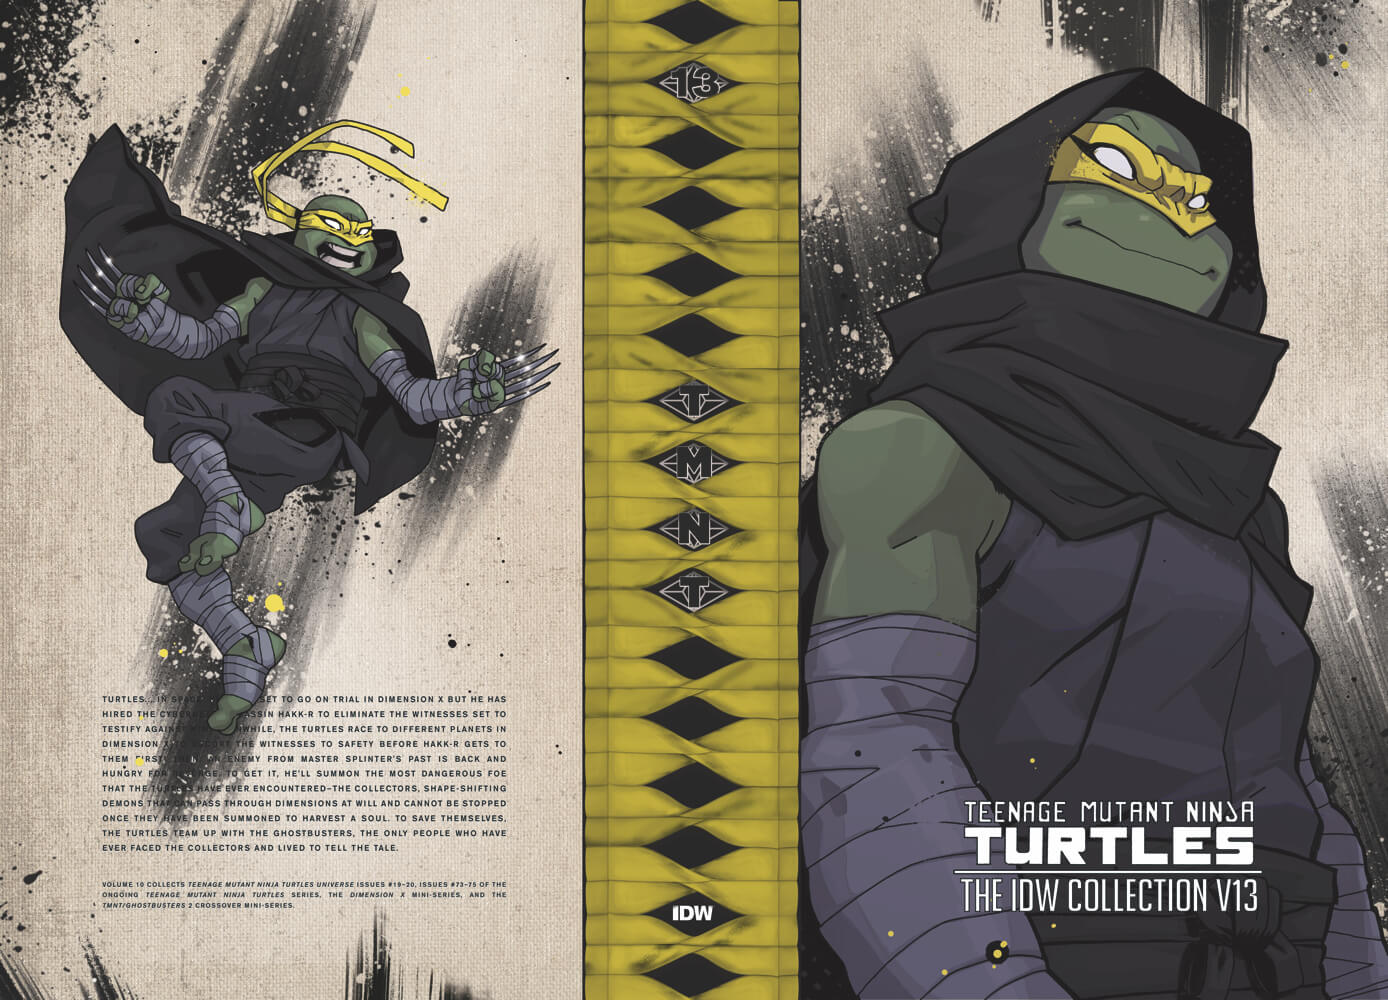 https://www.comicreleases.com/wp-content/uploads/2020/11/tmnt-IDWcollectionV13-cover.jpg